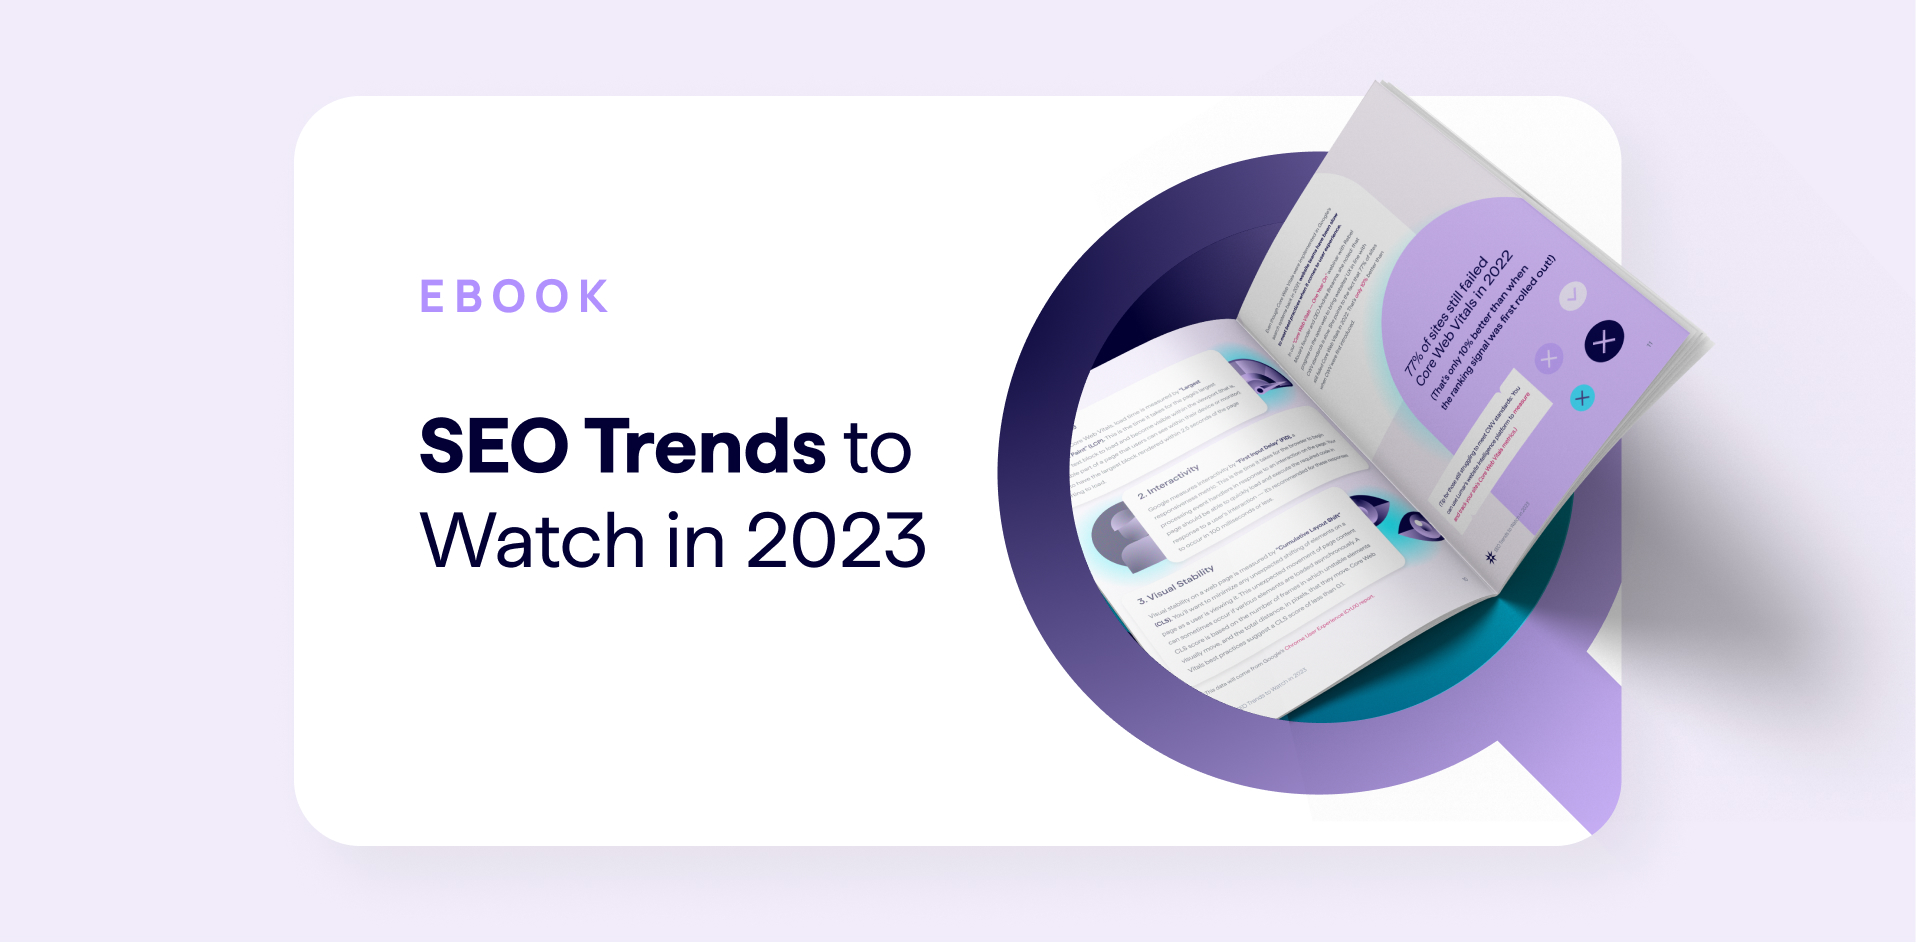 SEO 2023 Strategy Guide - Trends to Watch in 2023 e-book